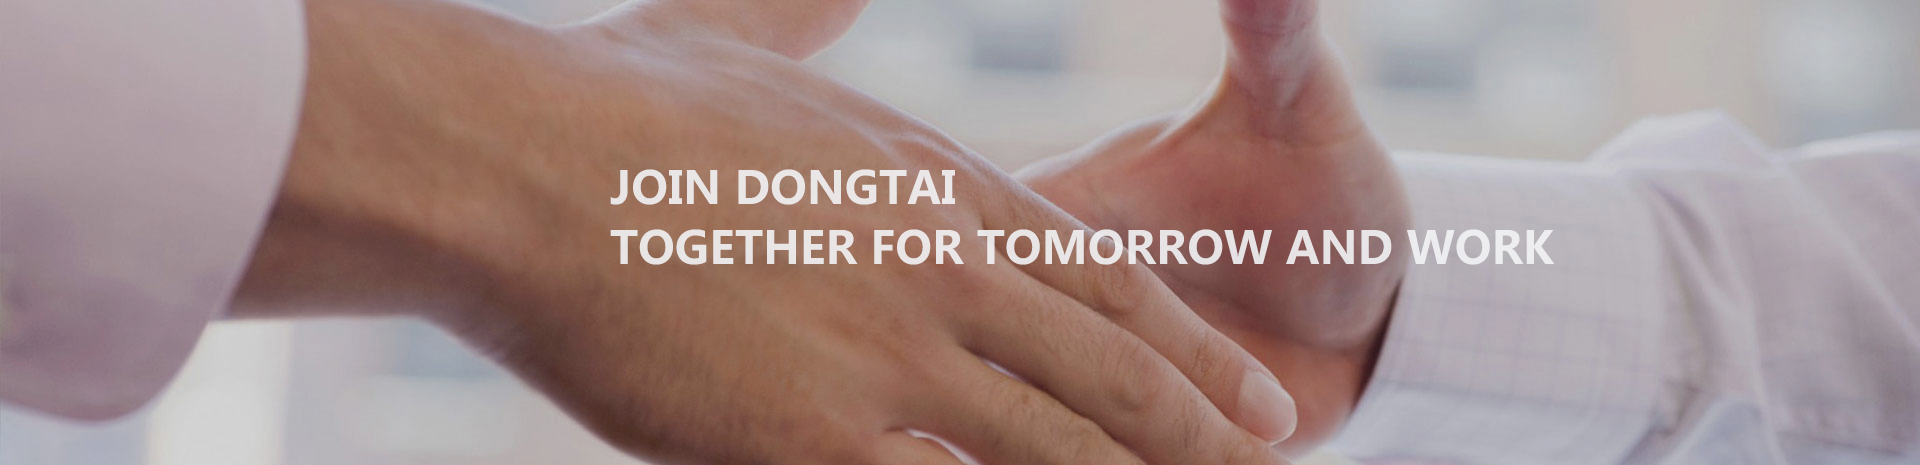 Join Dongtai